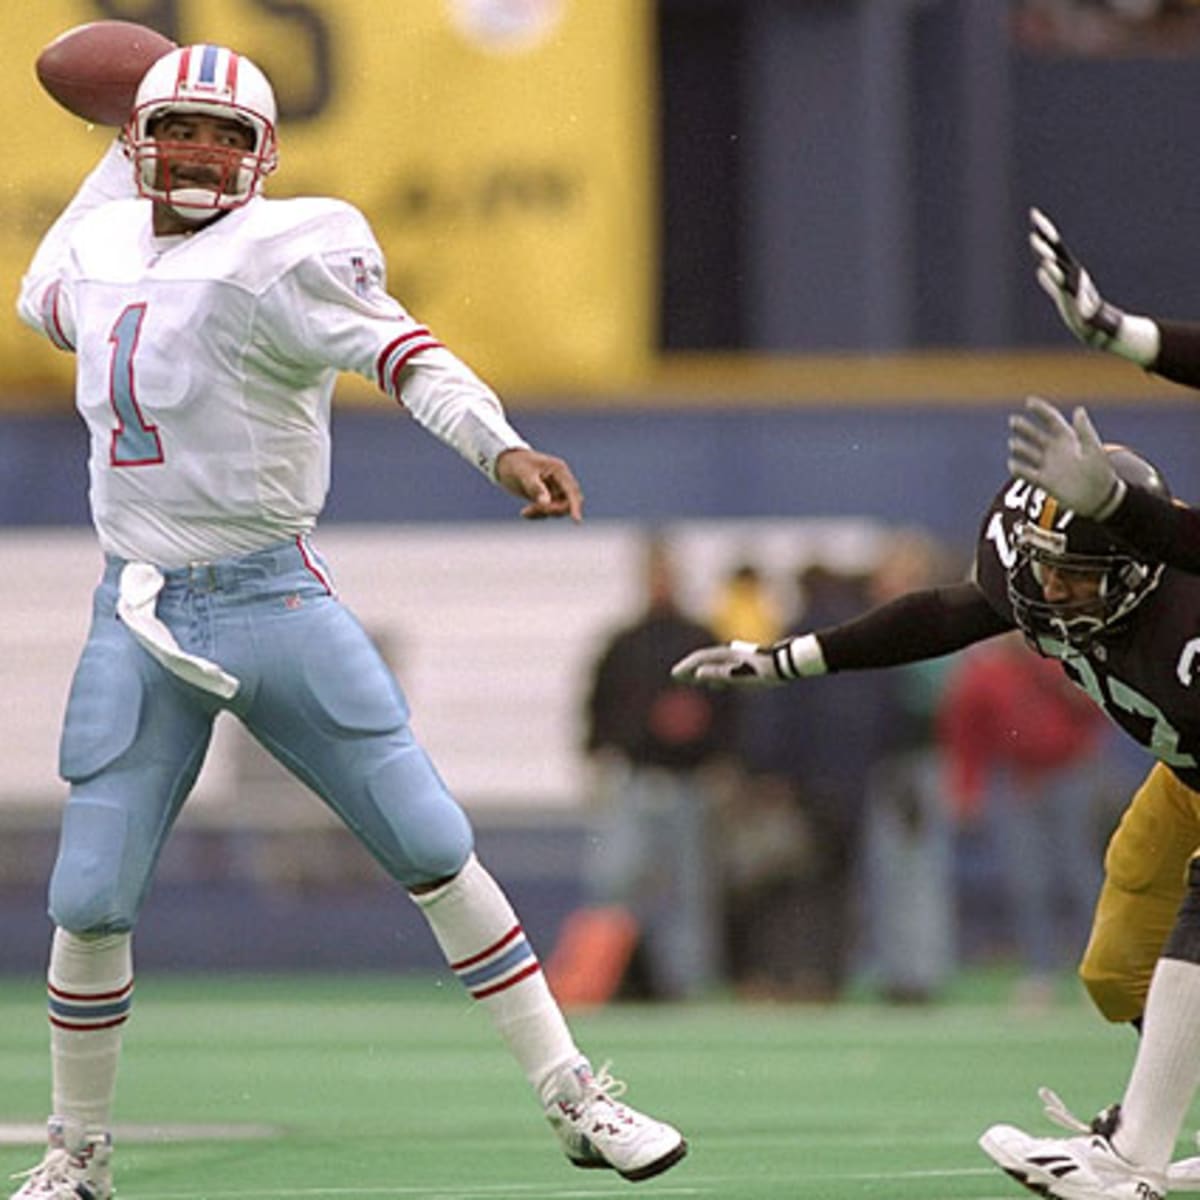 Warren Moon explains why he chose to wear jersey No. 1 - Sports Illustrated